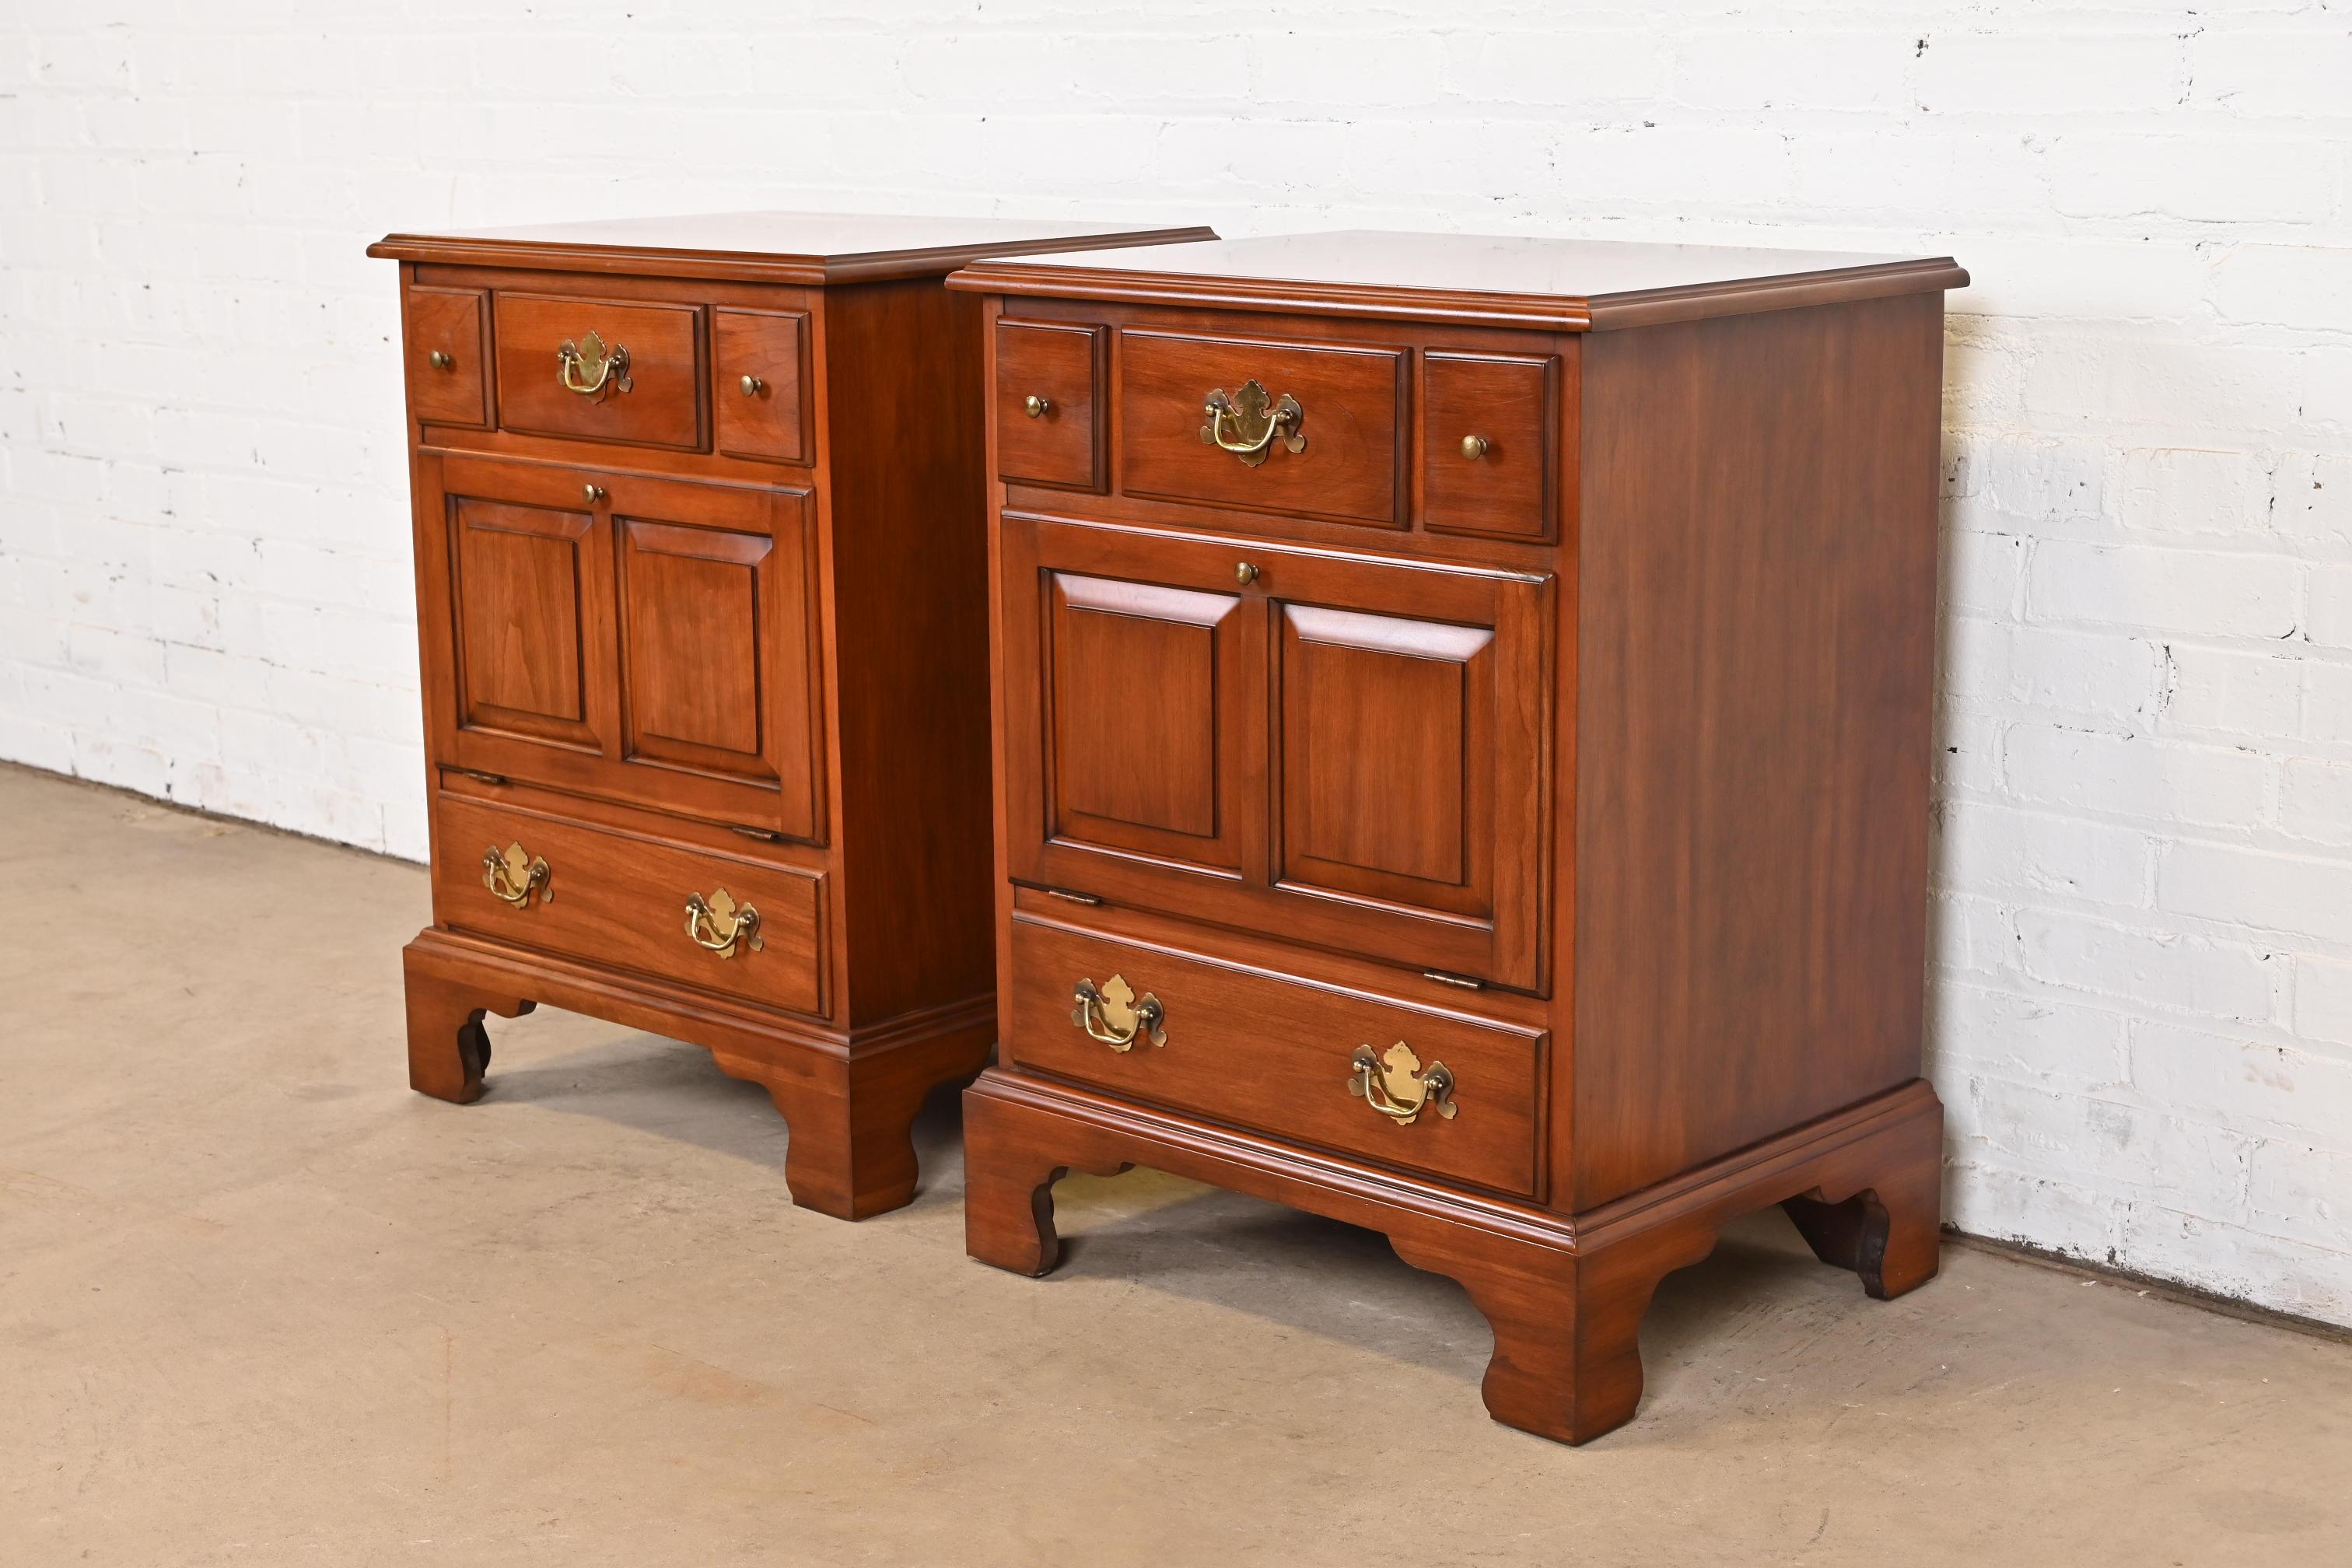 Henkel Harris American Colonial Solid Cherry Wood Bedside Chests, Pair In Good Condition For Sale In South Bend, IN